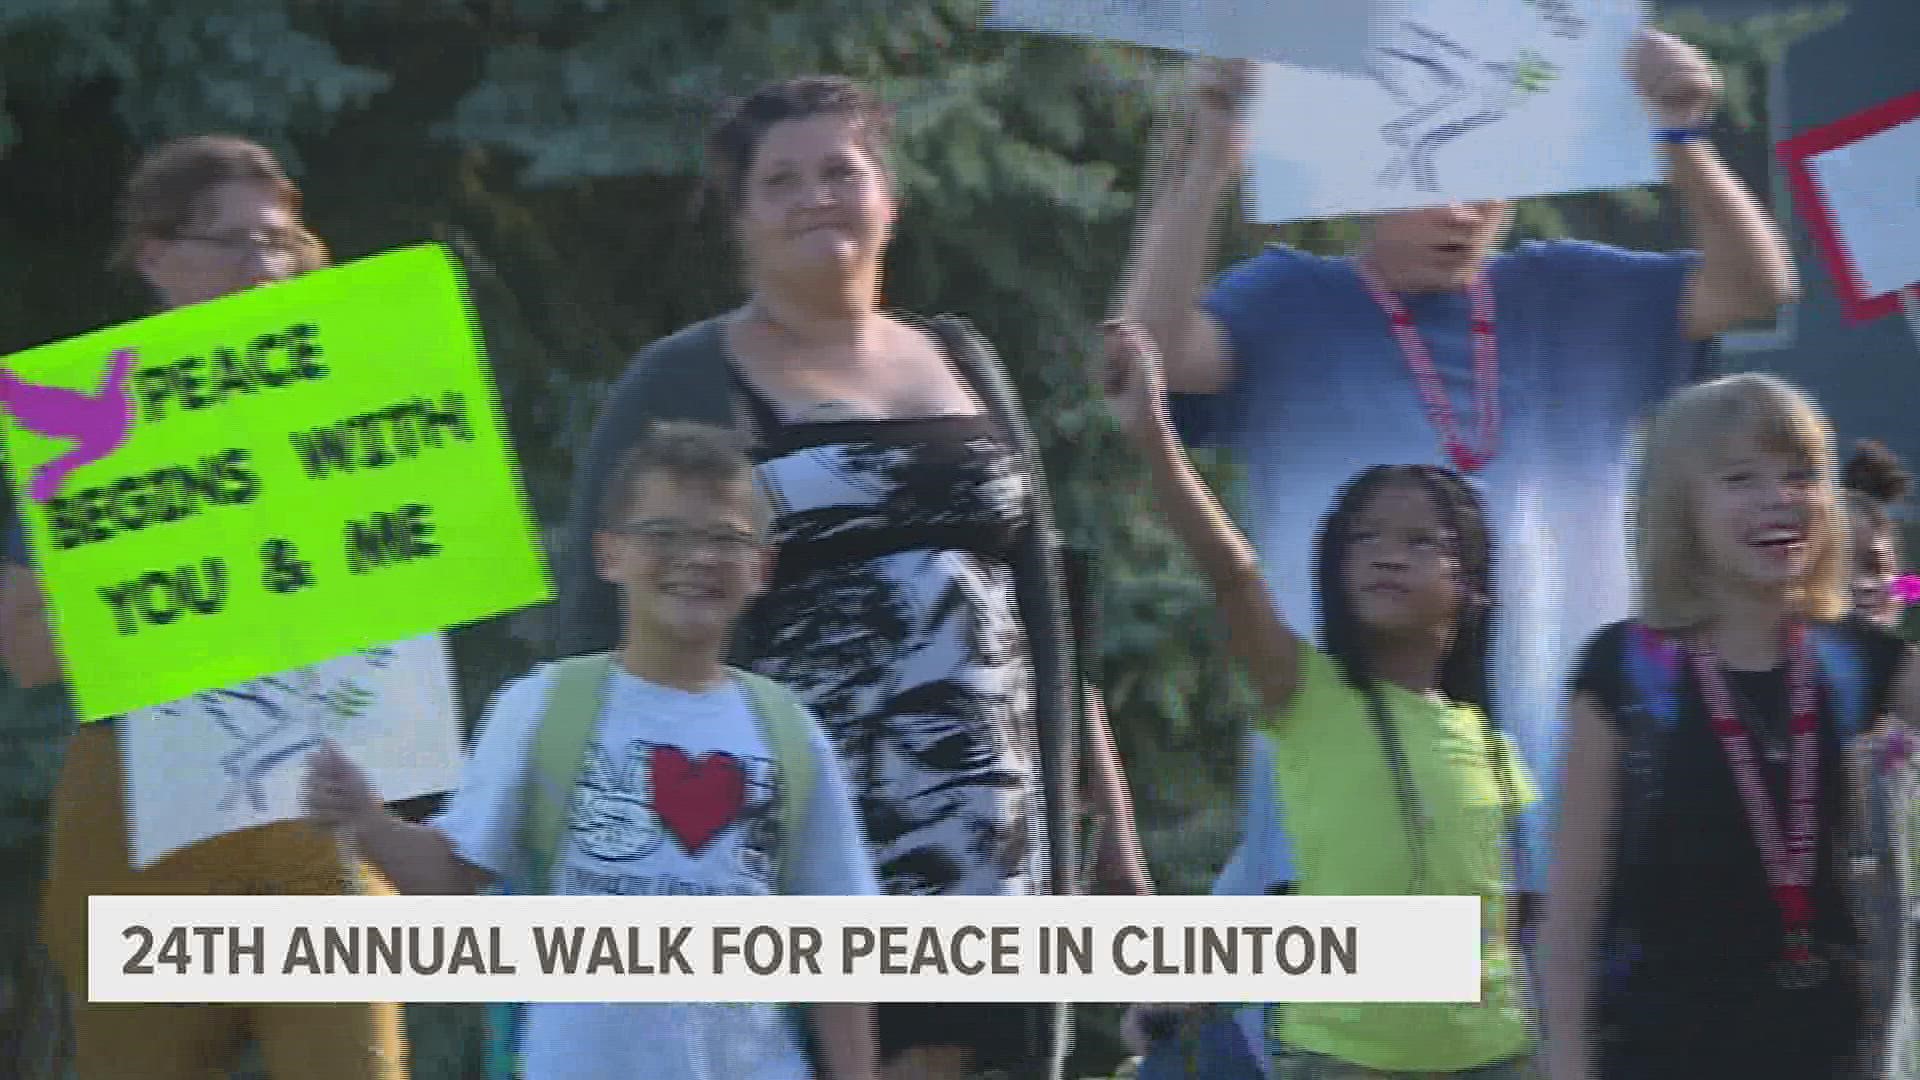 The event was held at the Jefferson Elementary School walking trail in Clinton.